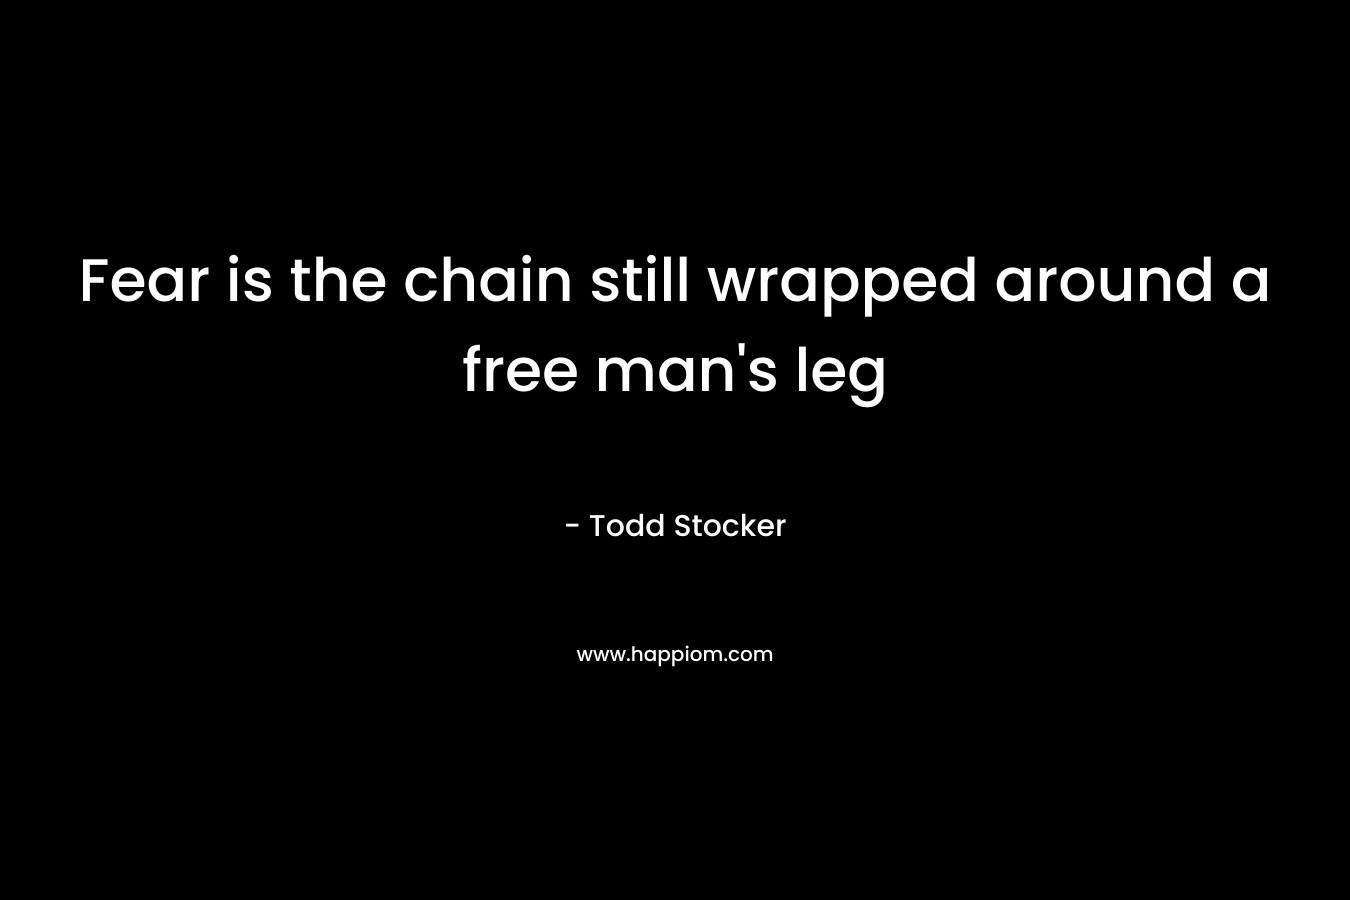 Fear is the chain still wrapped around a free man’s leg – Todd Stocker